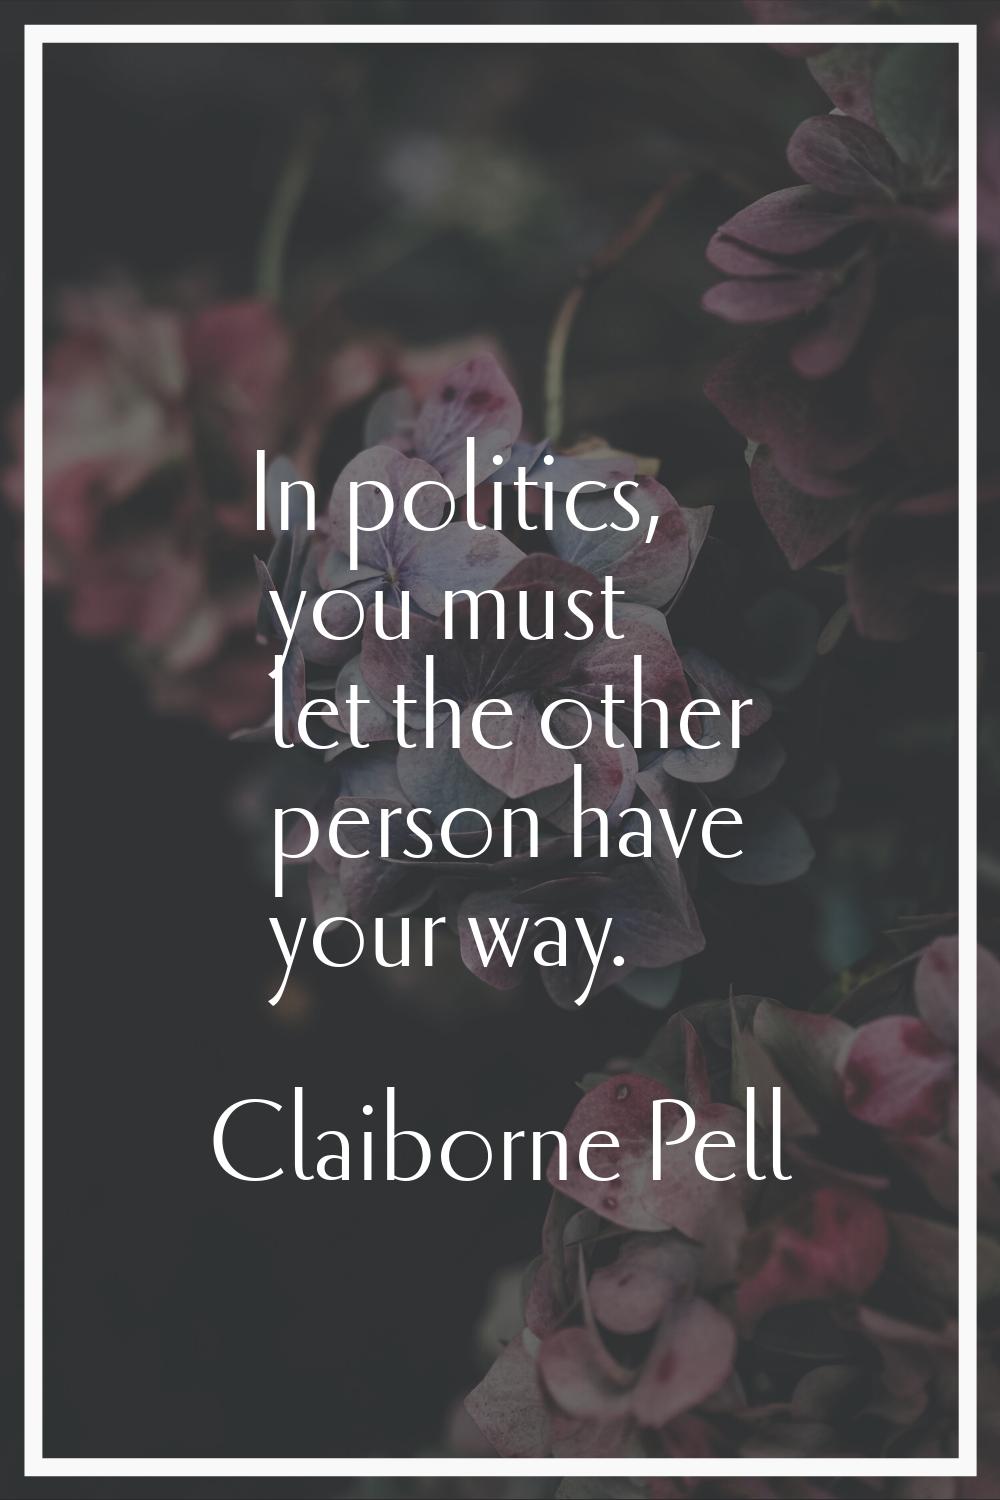 In politics, you must let the other person have your way.